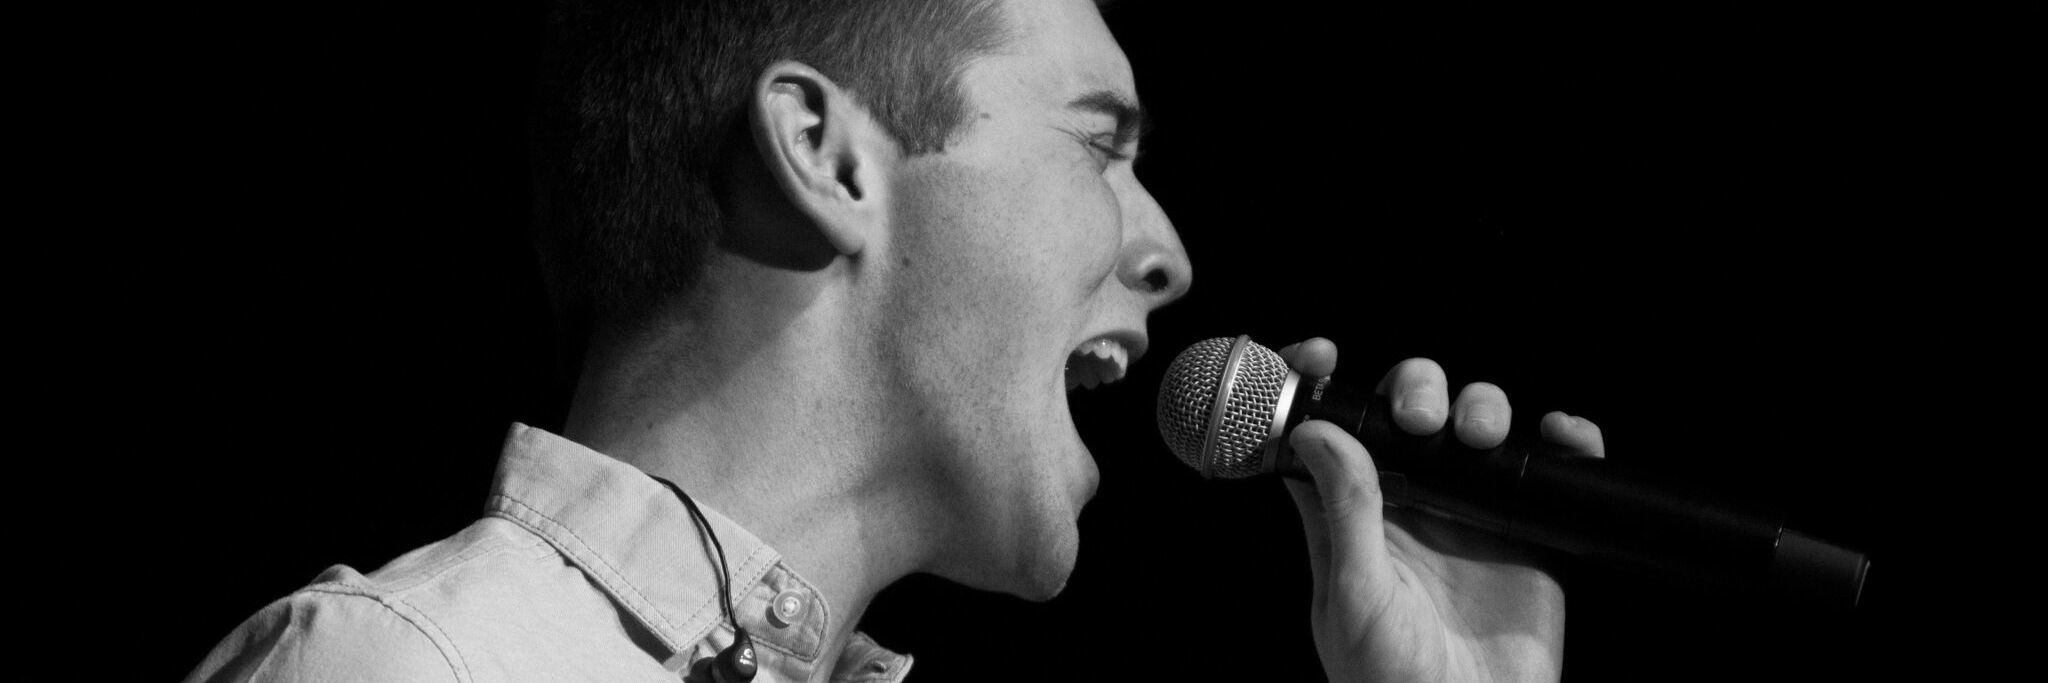 black and white photo of a young man singing